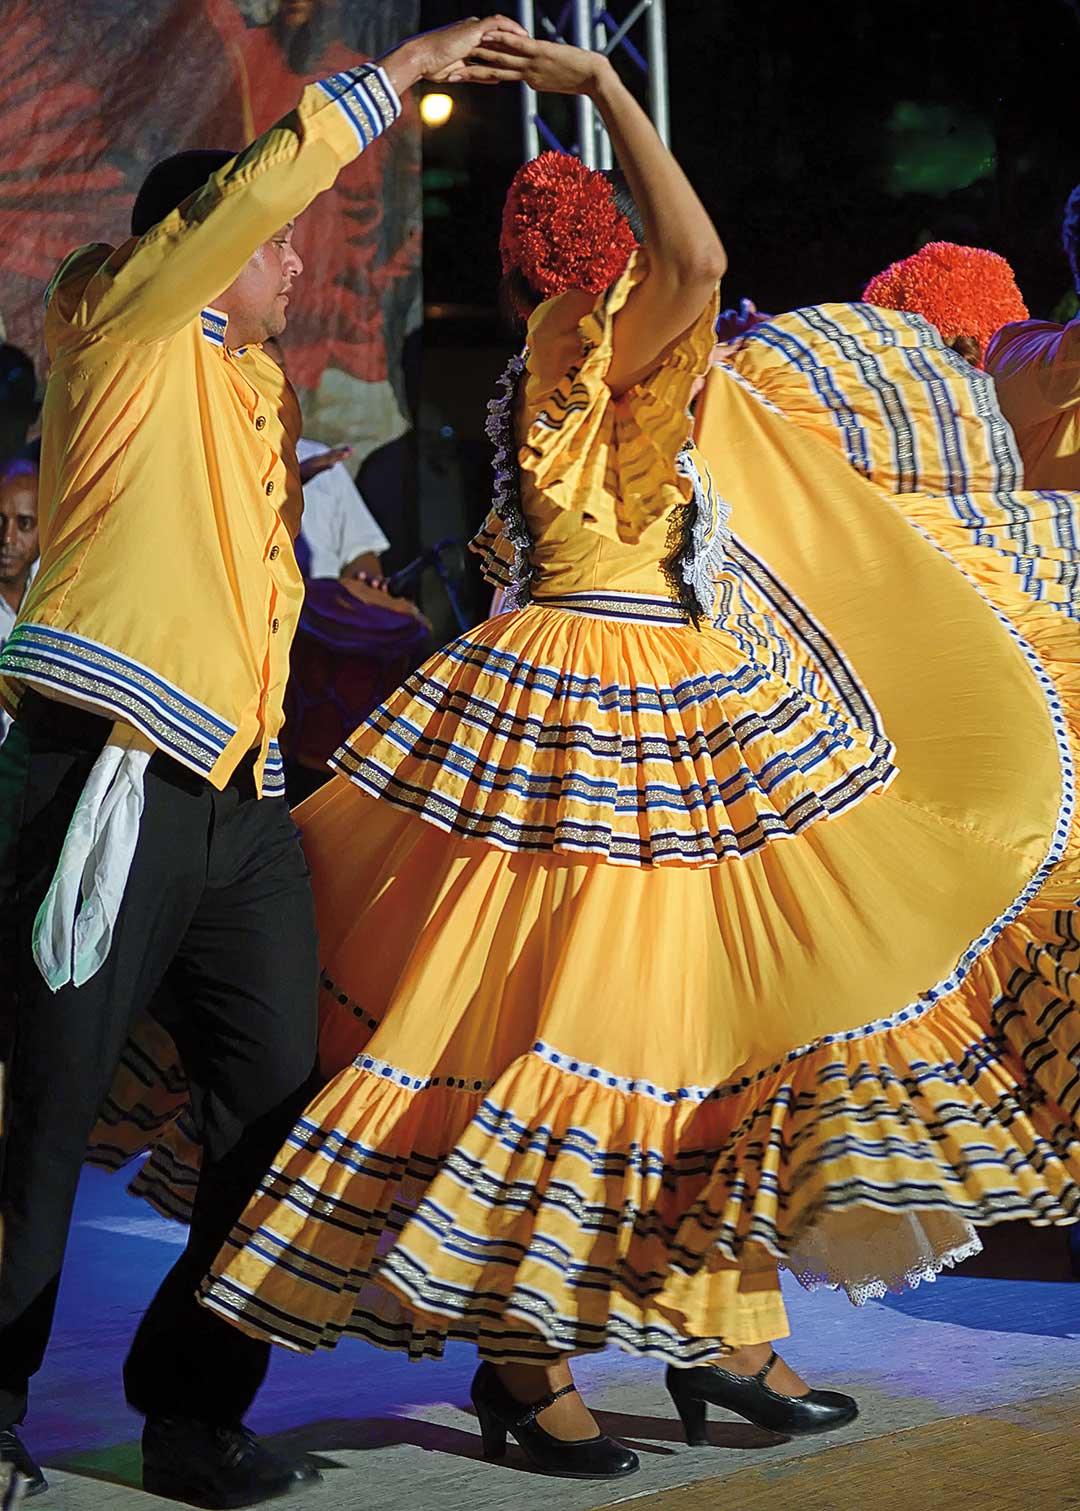 Dominican Dance: Merengue and Bachata | Moon Travel Guides